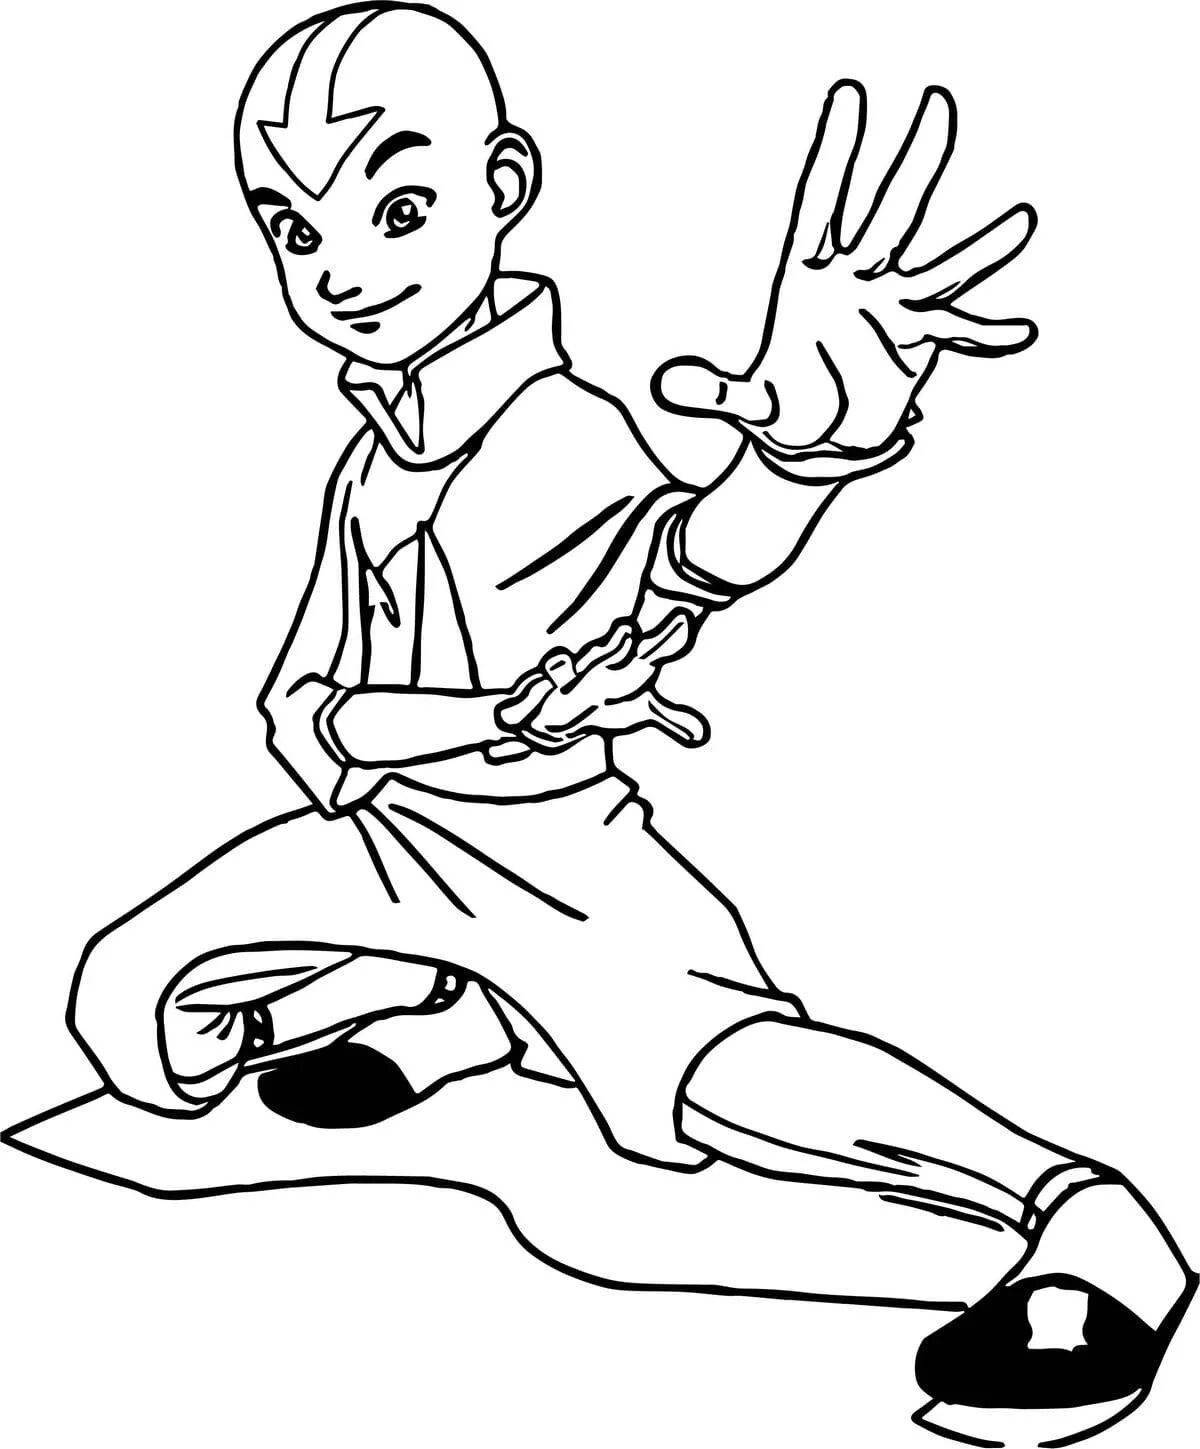 Aang's animated coloring page